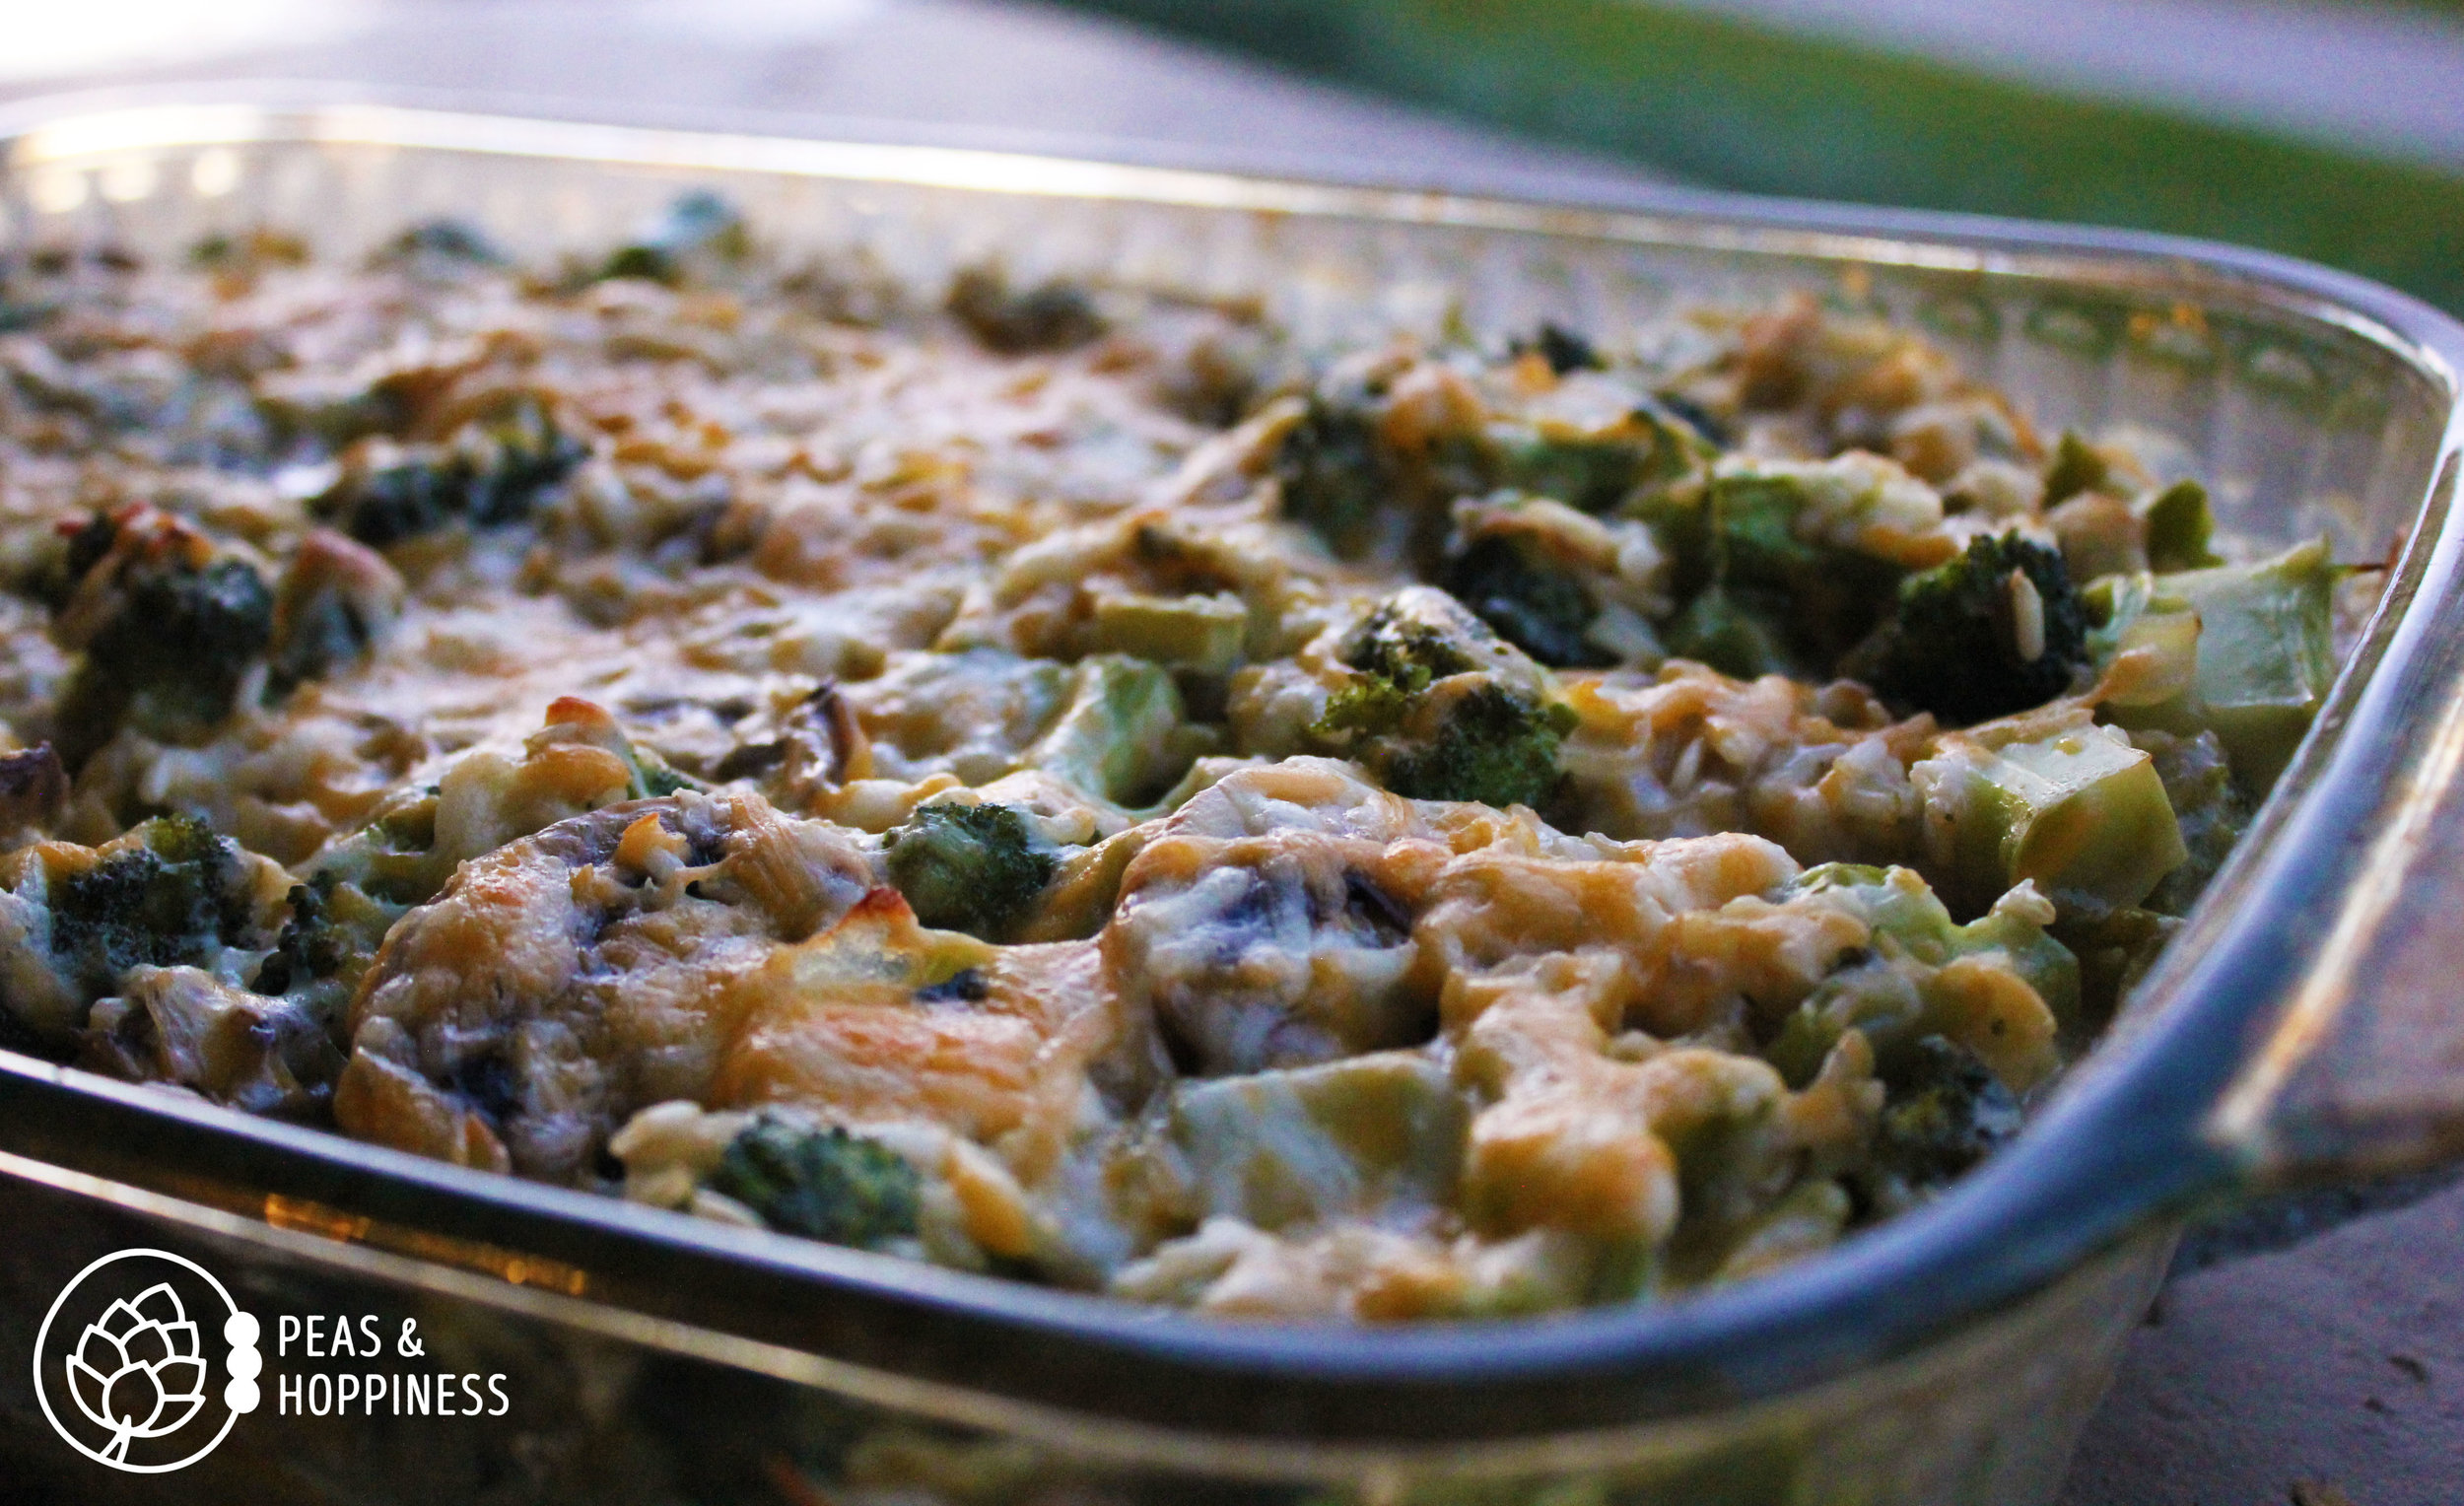 All-Natural Broccoli Rice Casserole. Because I believe healthy food should taste delicious.